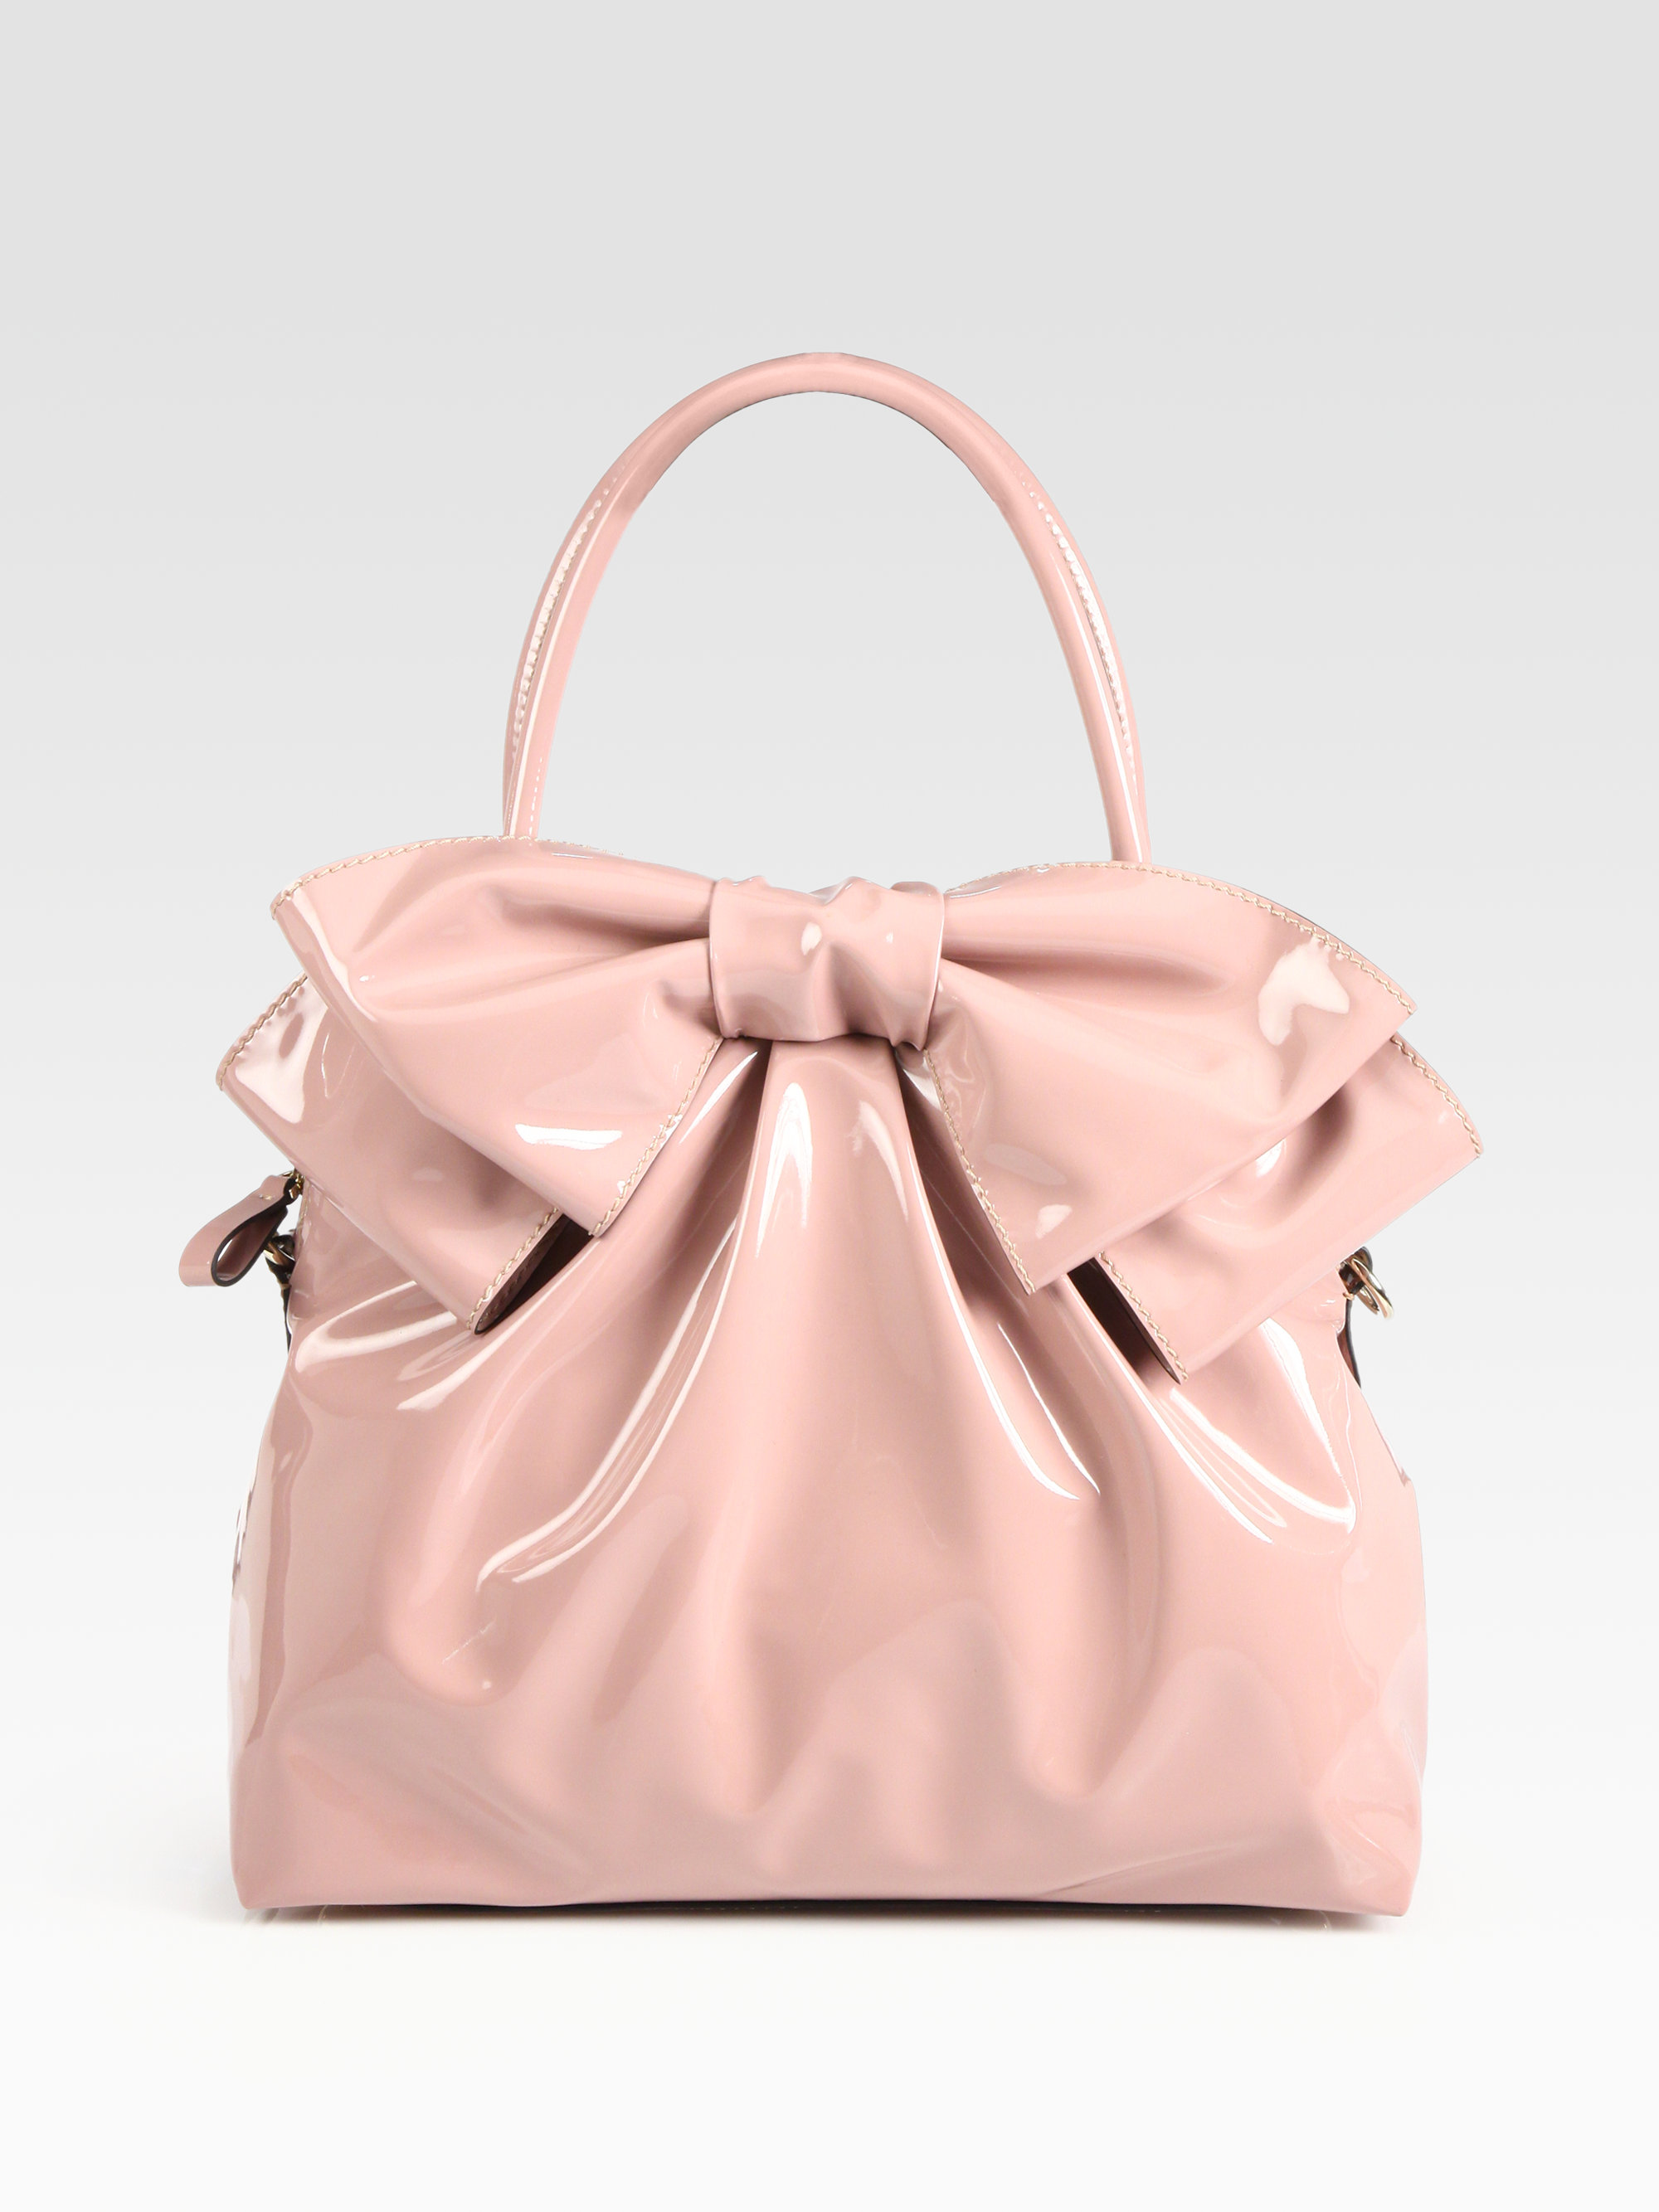 Valentino Lacca Dome Bag in Blush (Pink) Lyst